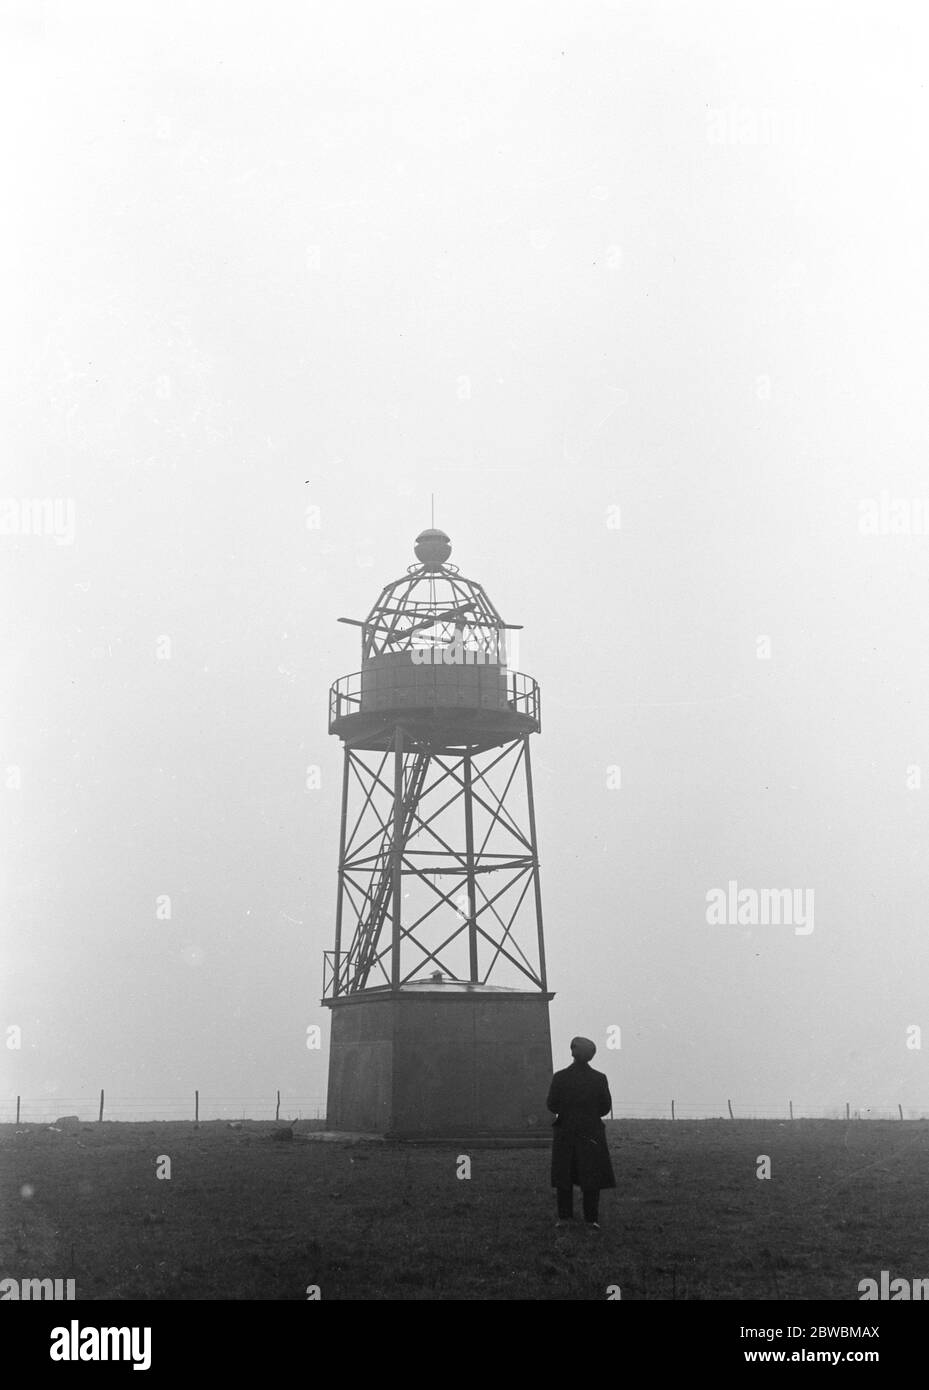 The new land lighthouse at Tatsfield 8 miles South East of Croydon in the Tandridge district of Surrey for the guidance of aerial traffic . the lighthouse is situated on a commanding height 8 April 1922 Stock Photo